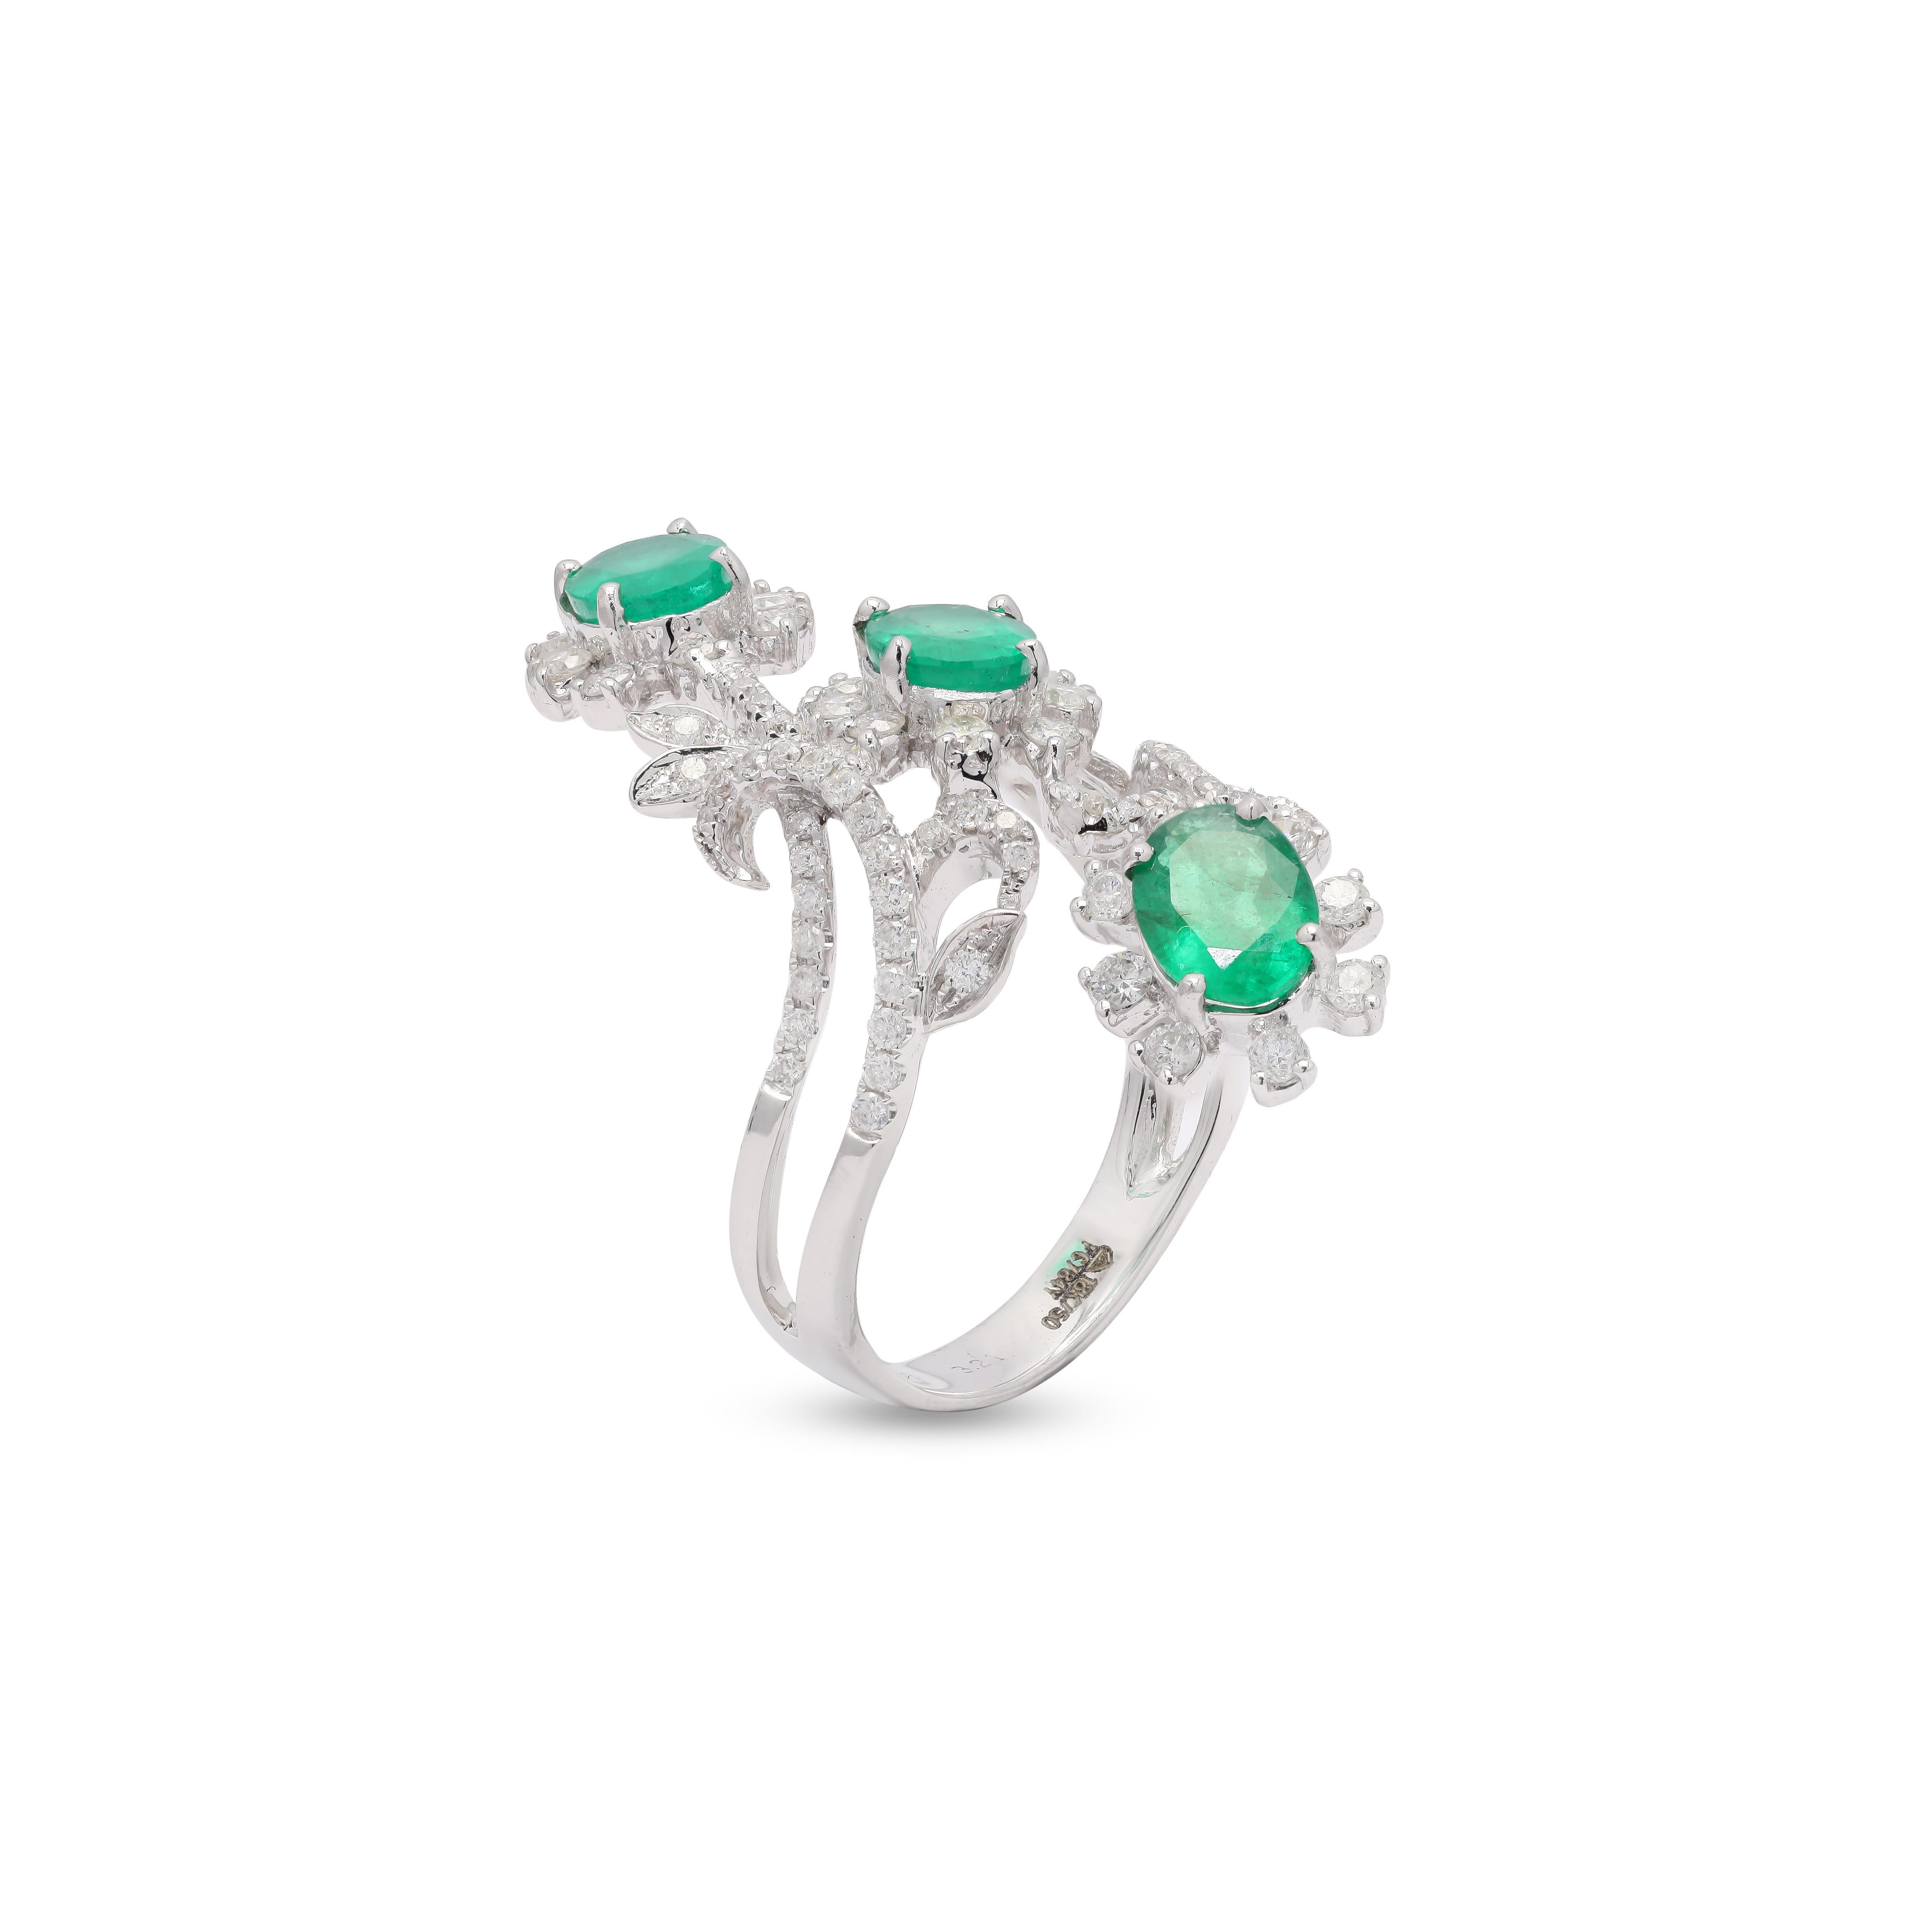 For Sale:  14K White Gold Three Stone Emerald and Diamond Cocktail Ring 2